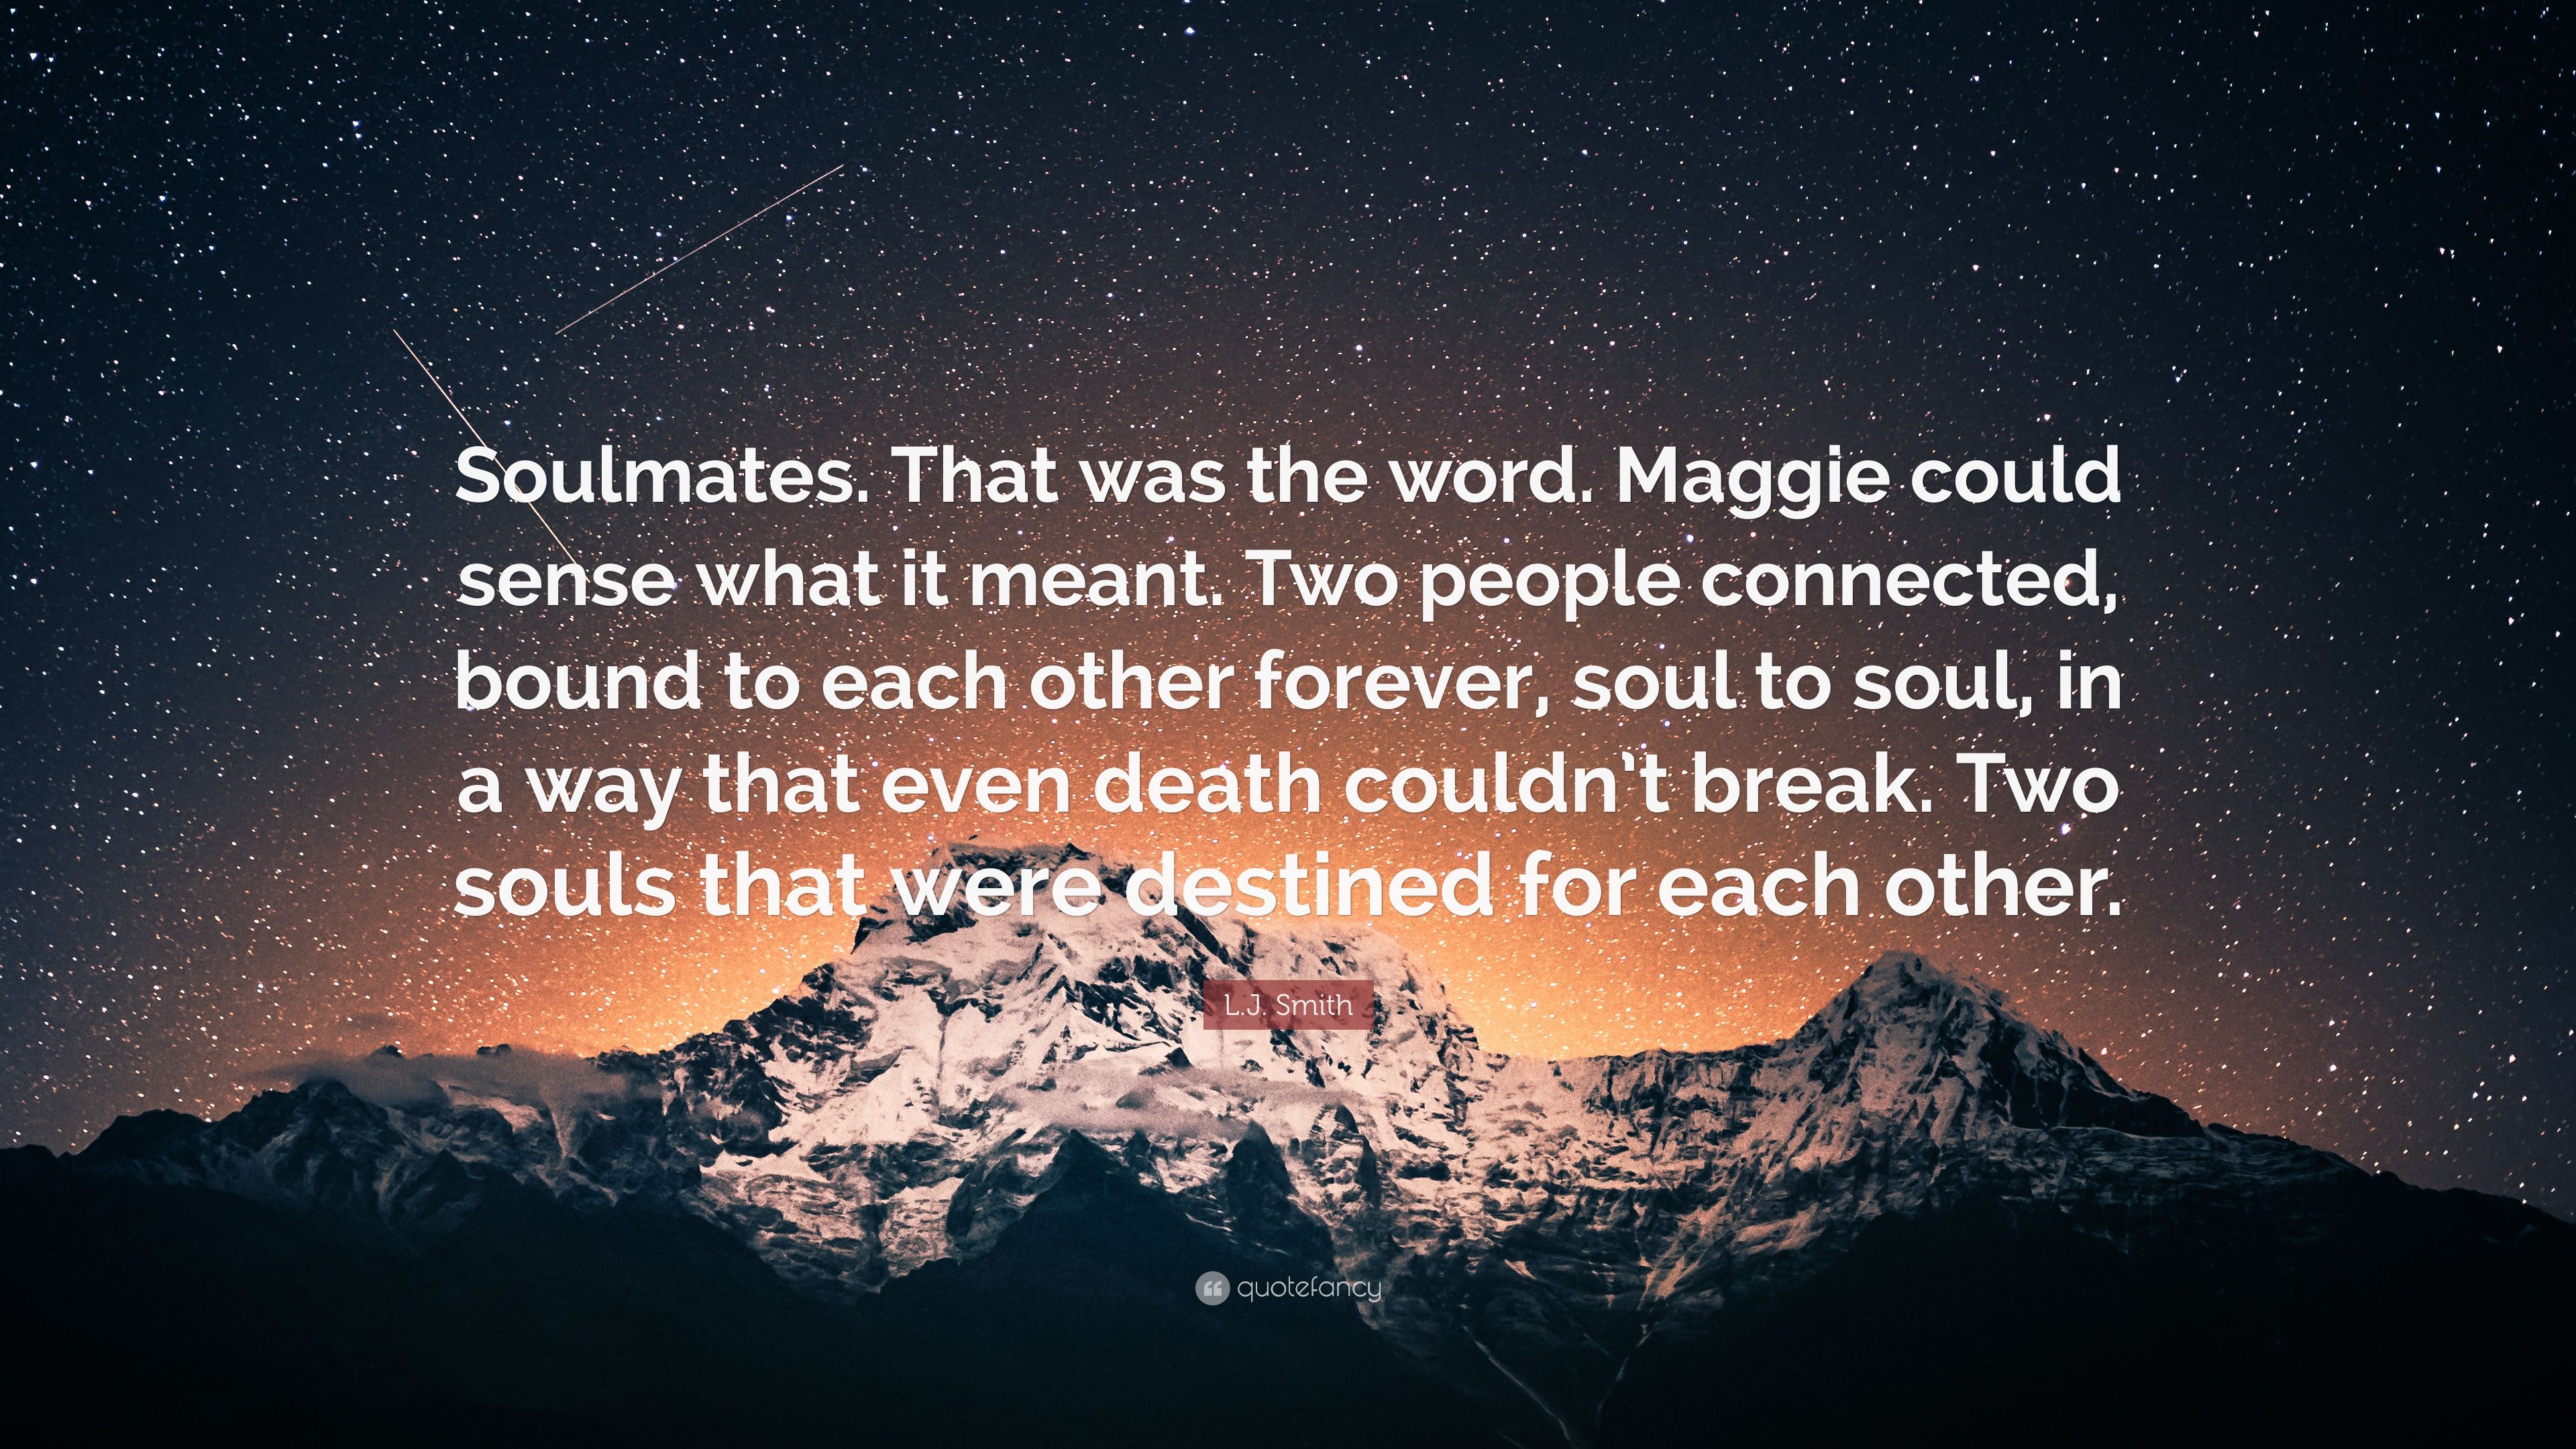 L.J. Smith Quote: “Soulmates. That was the word. Maggie